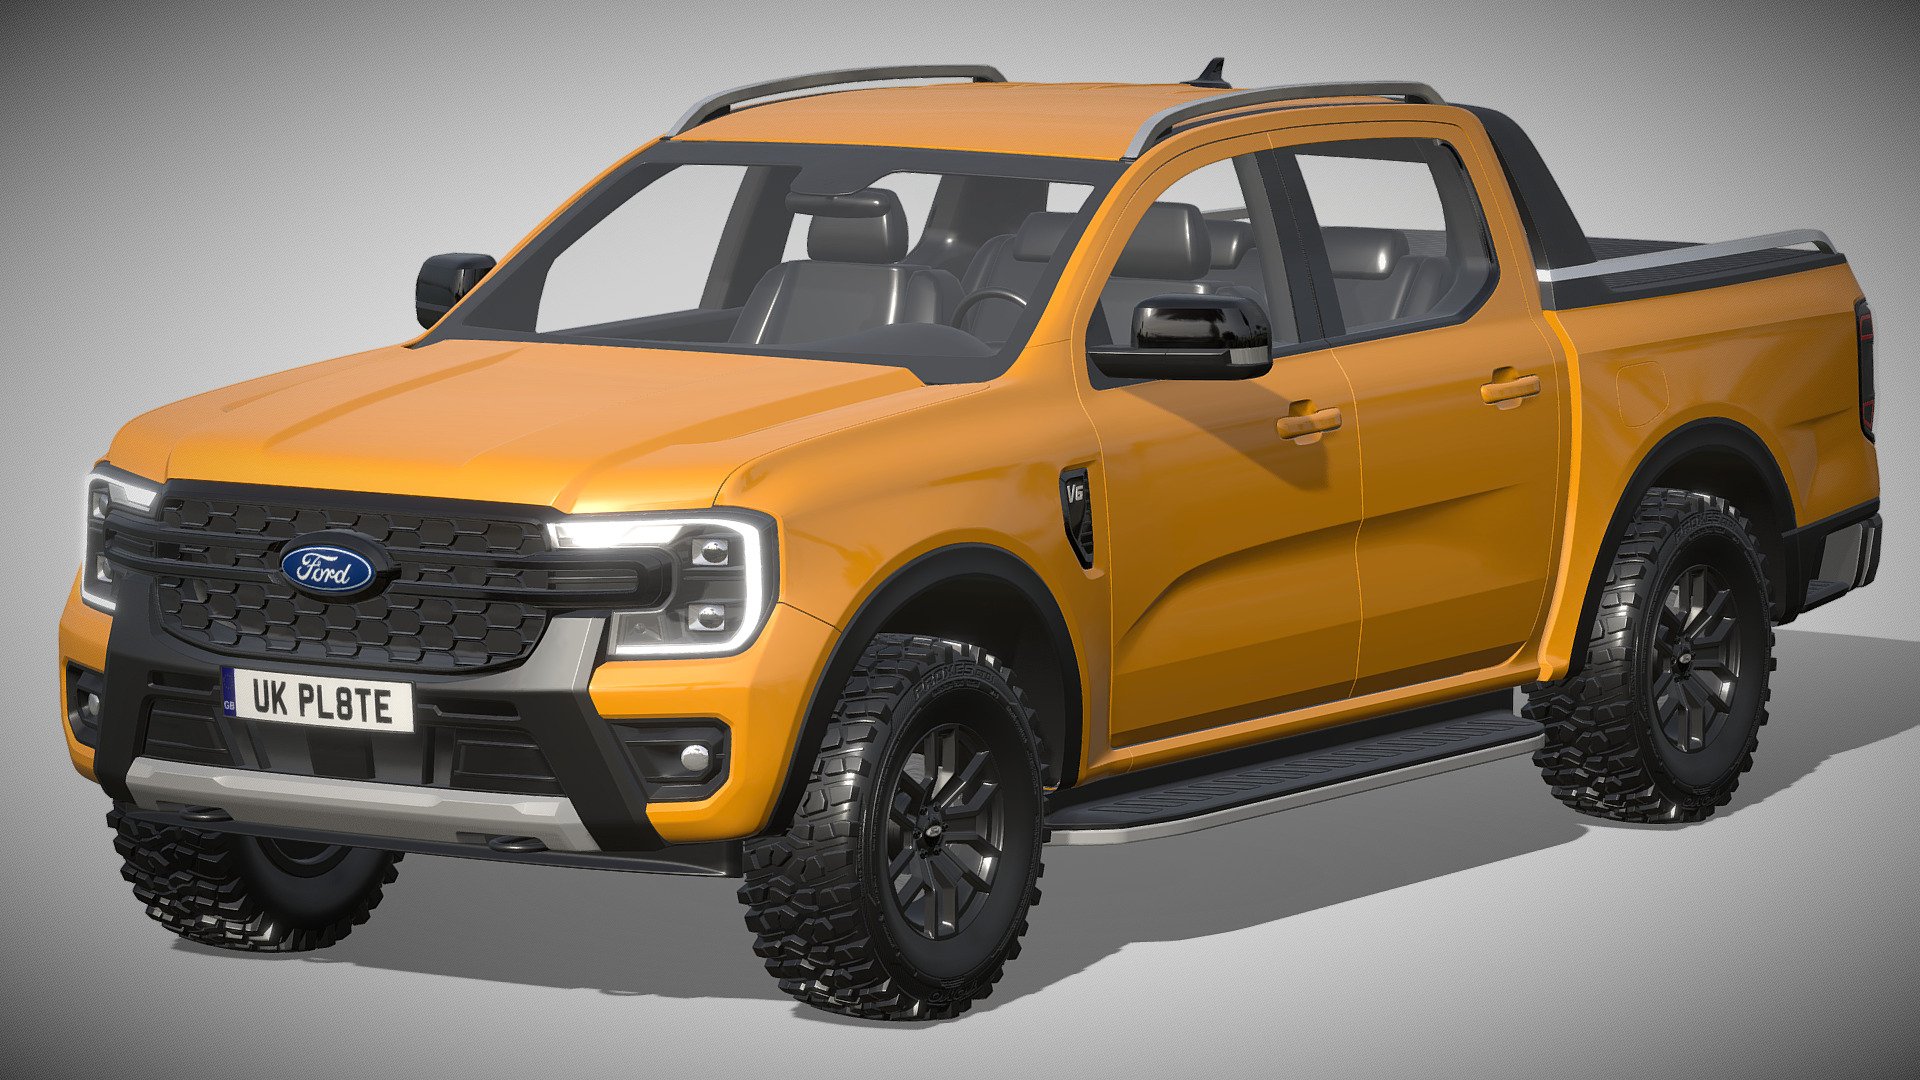 Ford Ranger Wildtrak 2023

https://www.ford.com.au/showroom/future-vehicle/next-gen-ranger/wildtrak/

Clean geometry Light weight model, yet completely detailed for HI-Res renders. Use for movies, Advertisements or games

Corona render and materials

All textures include in *.rar files

Lighting setup is not included in the file! - Ford Ranger Wildtrak 2023 - Buy Royalty Free 3D model by zifir3d 3d model